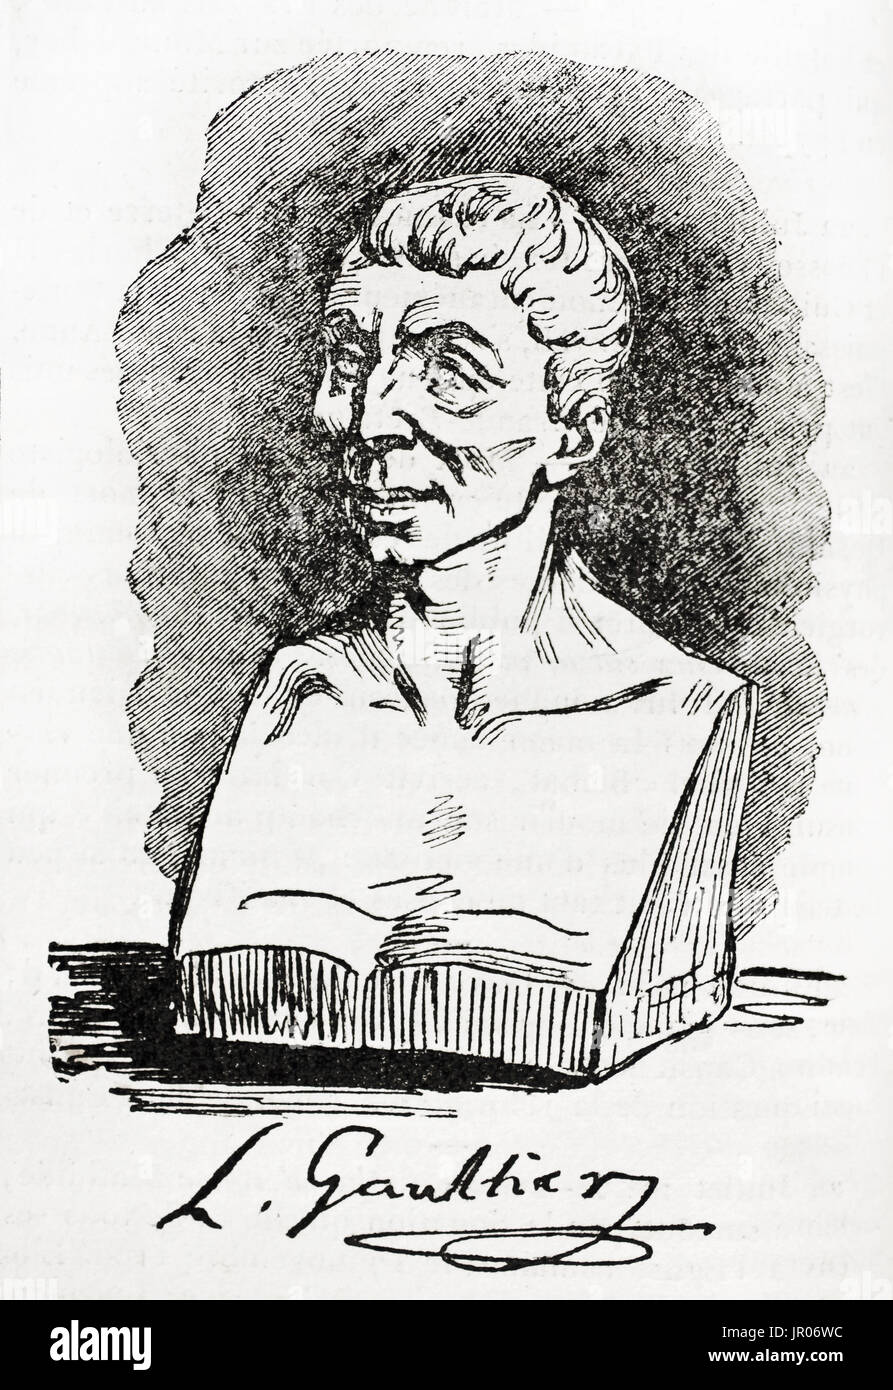 Old engraved reproduction of a bust of Louis Gaultier (1746 - 1818), better known as L'abbé Gaultier, French pedagogist. By unidentified author, publi Stock Photo